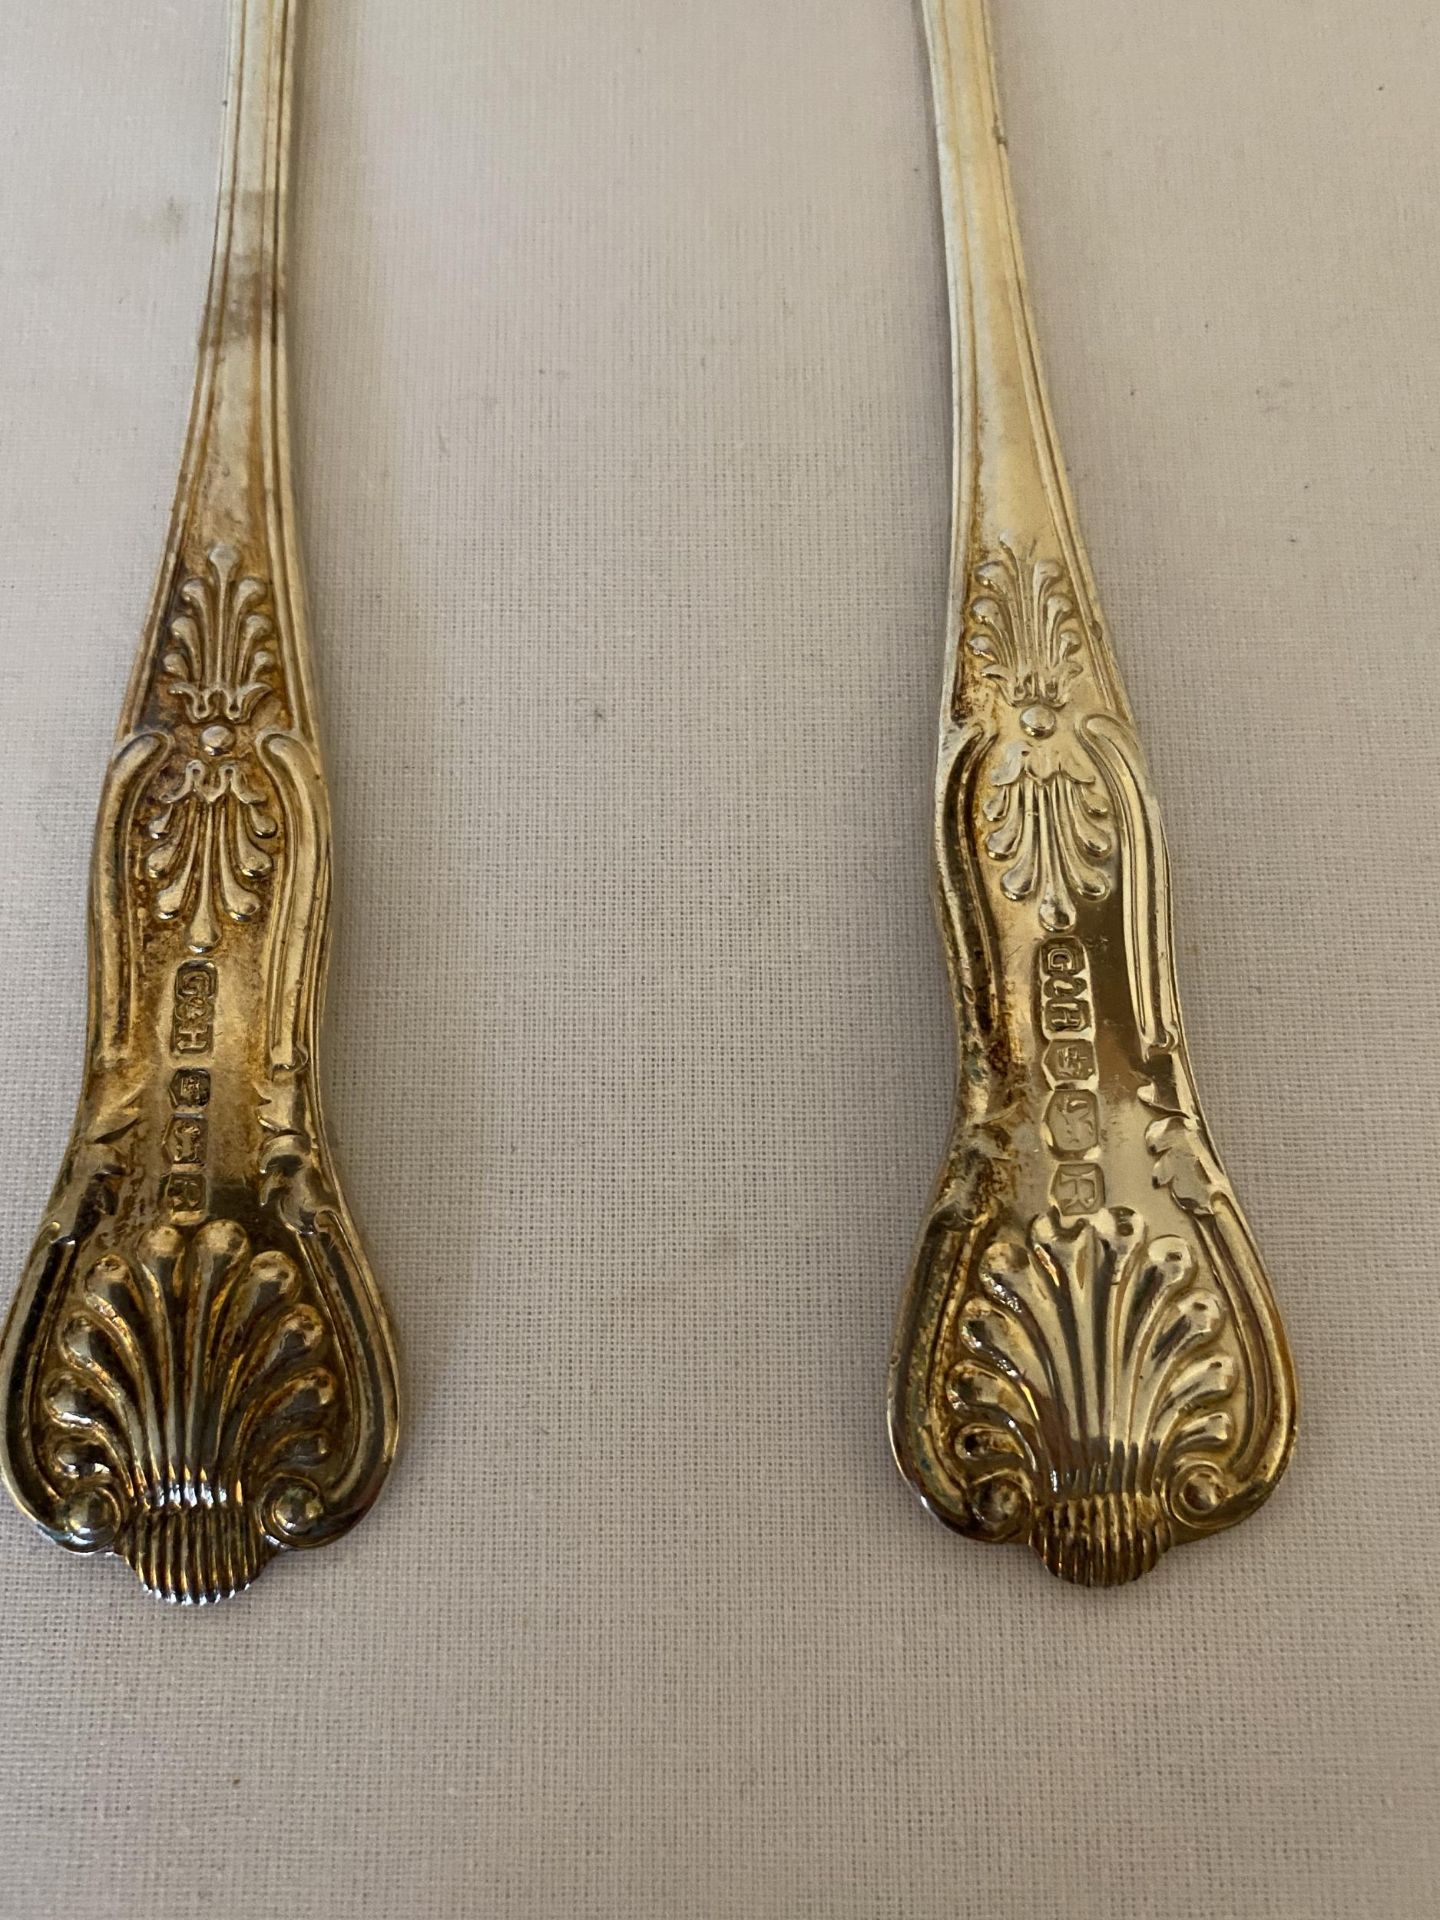 A PAIR OF ELIZABETH II 1959 HALLMARKED SHEFFIELD SILVER SPOONS, MAKER GEE & HOLMES, GROSS WEIGHT 187 - Image 10 of 15